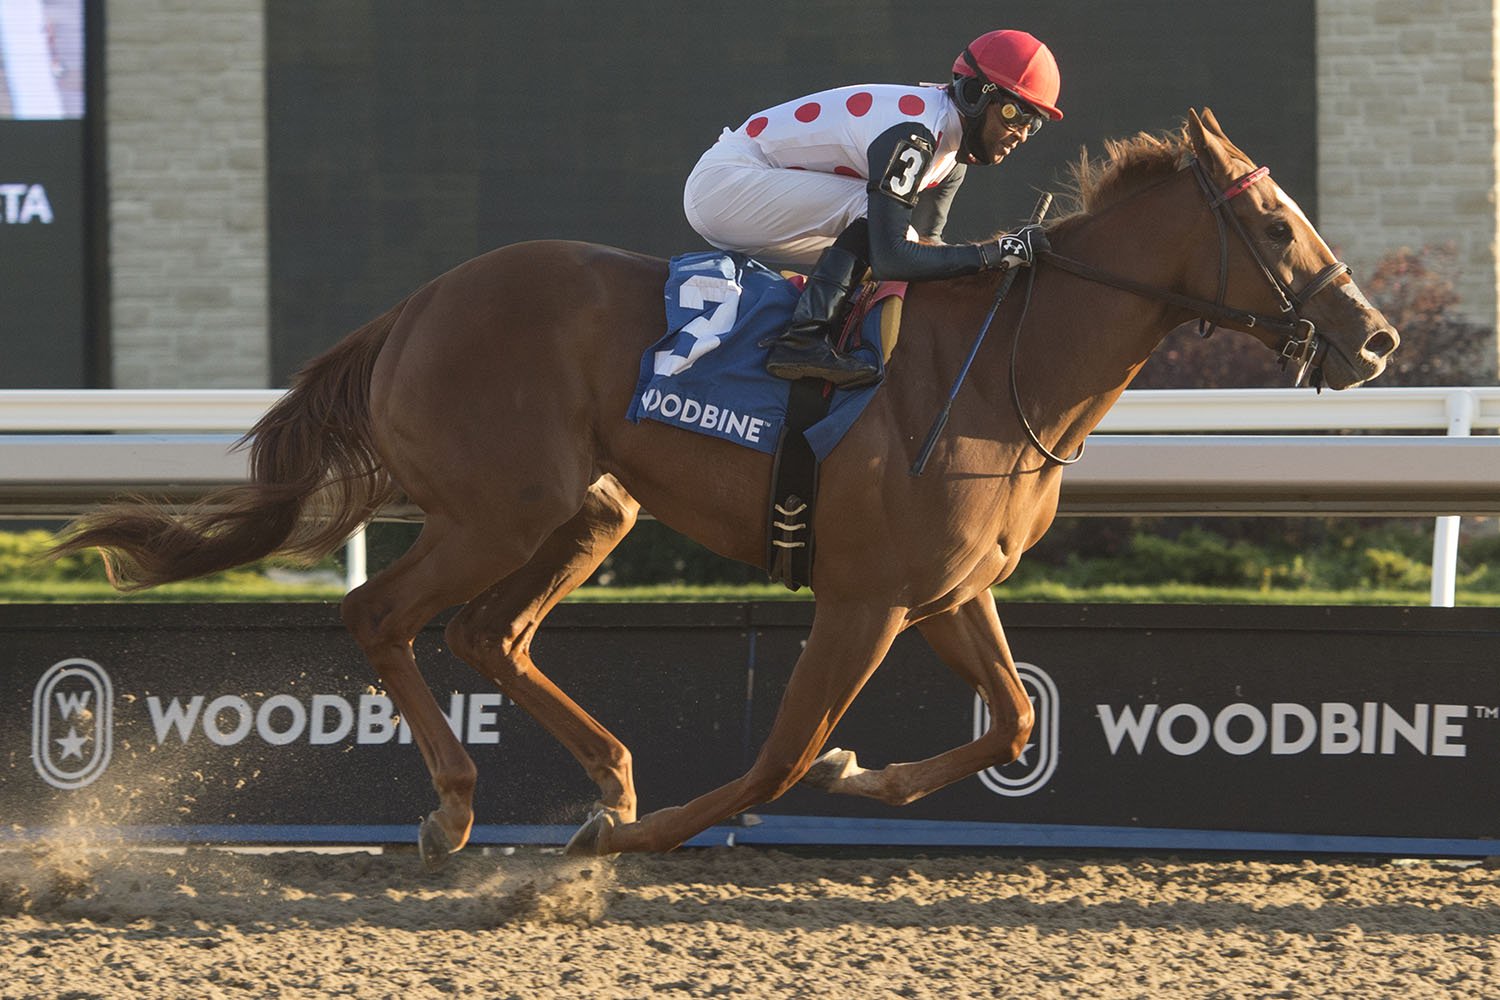 Souper Sensational and jockey Patrick Husbands winning the $100,000 Glorious Song Stakes on Saturday, Oct. 17 at Woodbine Racetrack. (Michael Burns Photo)